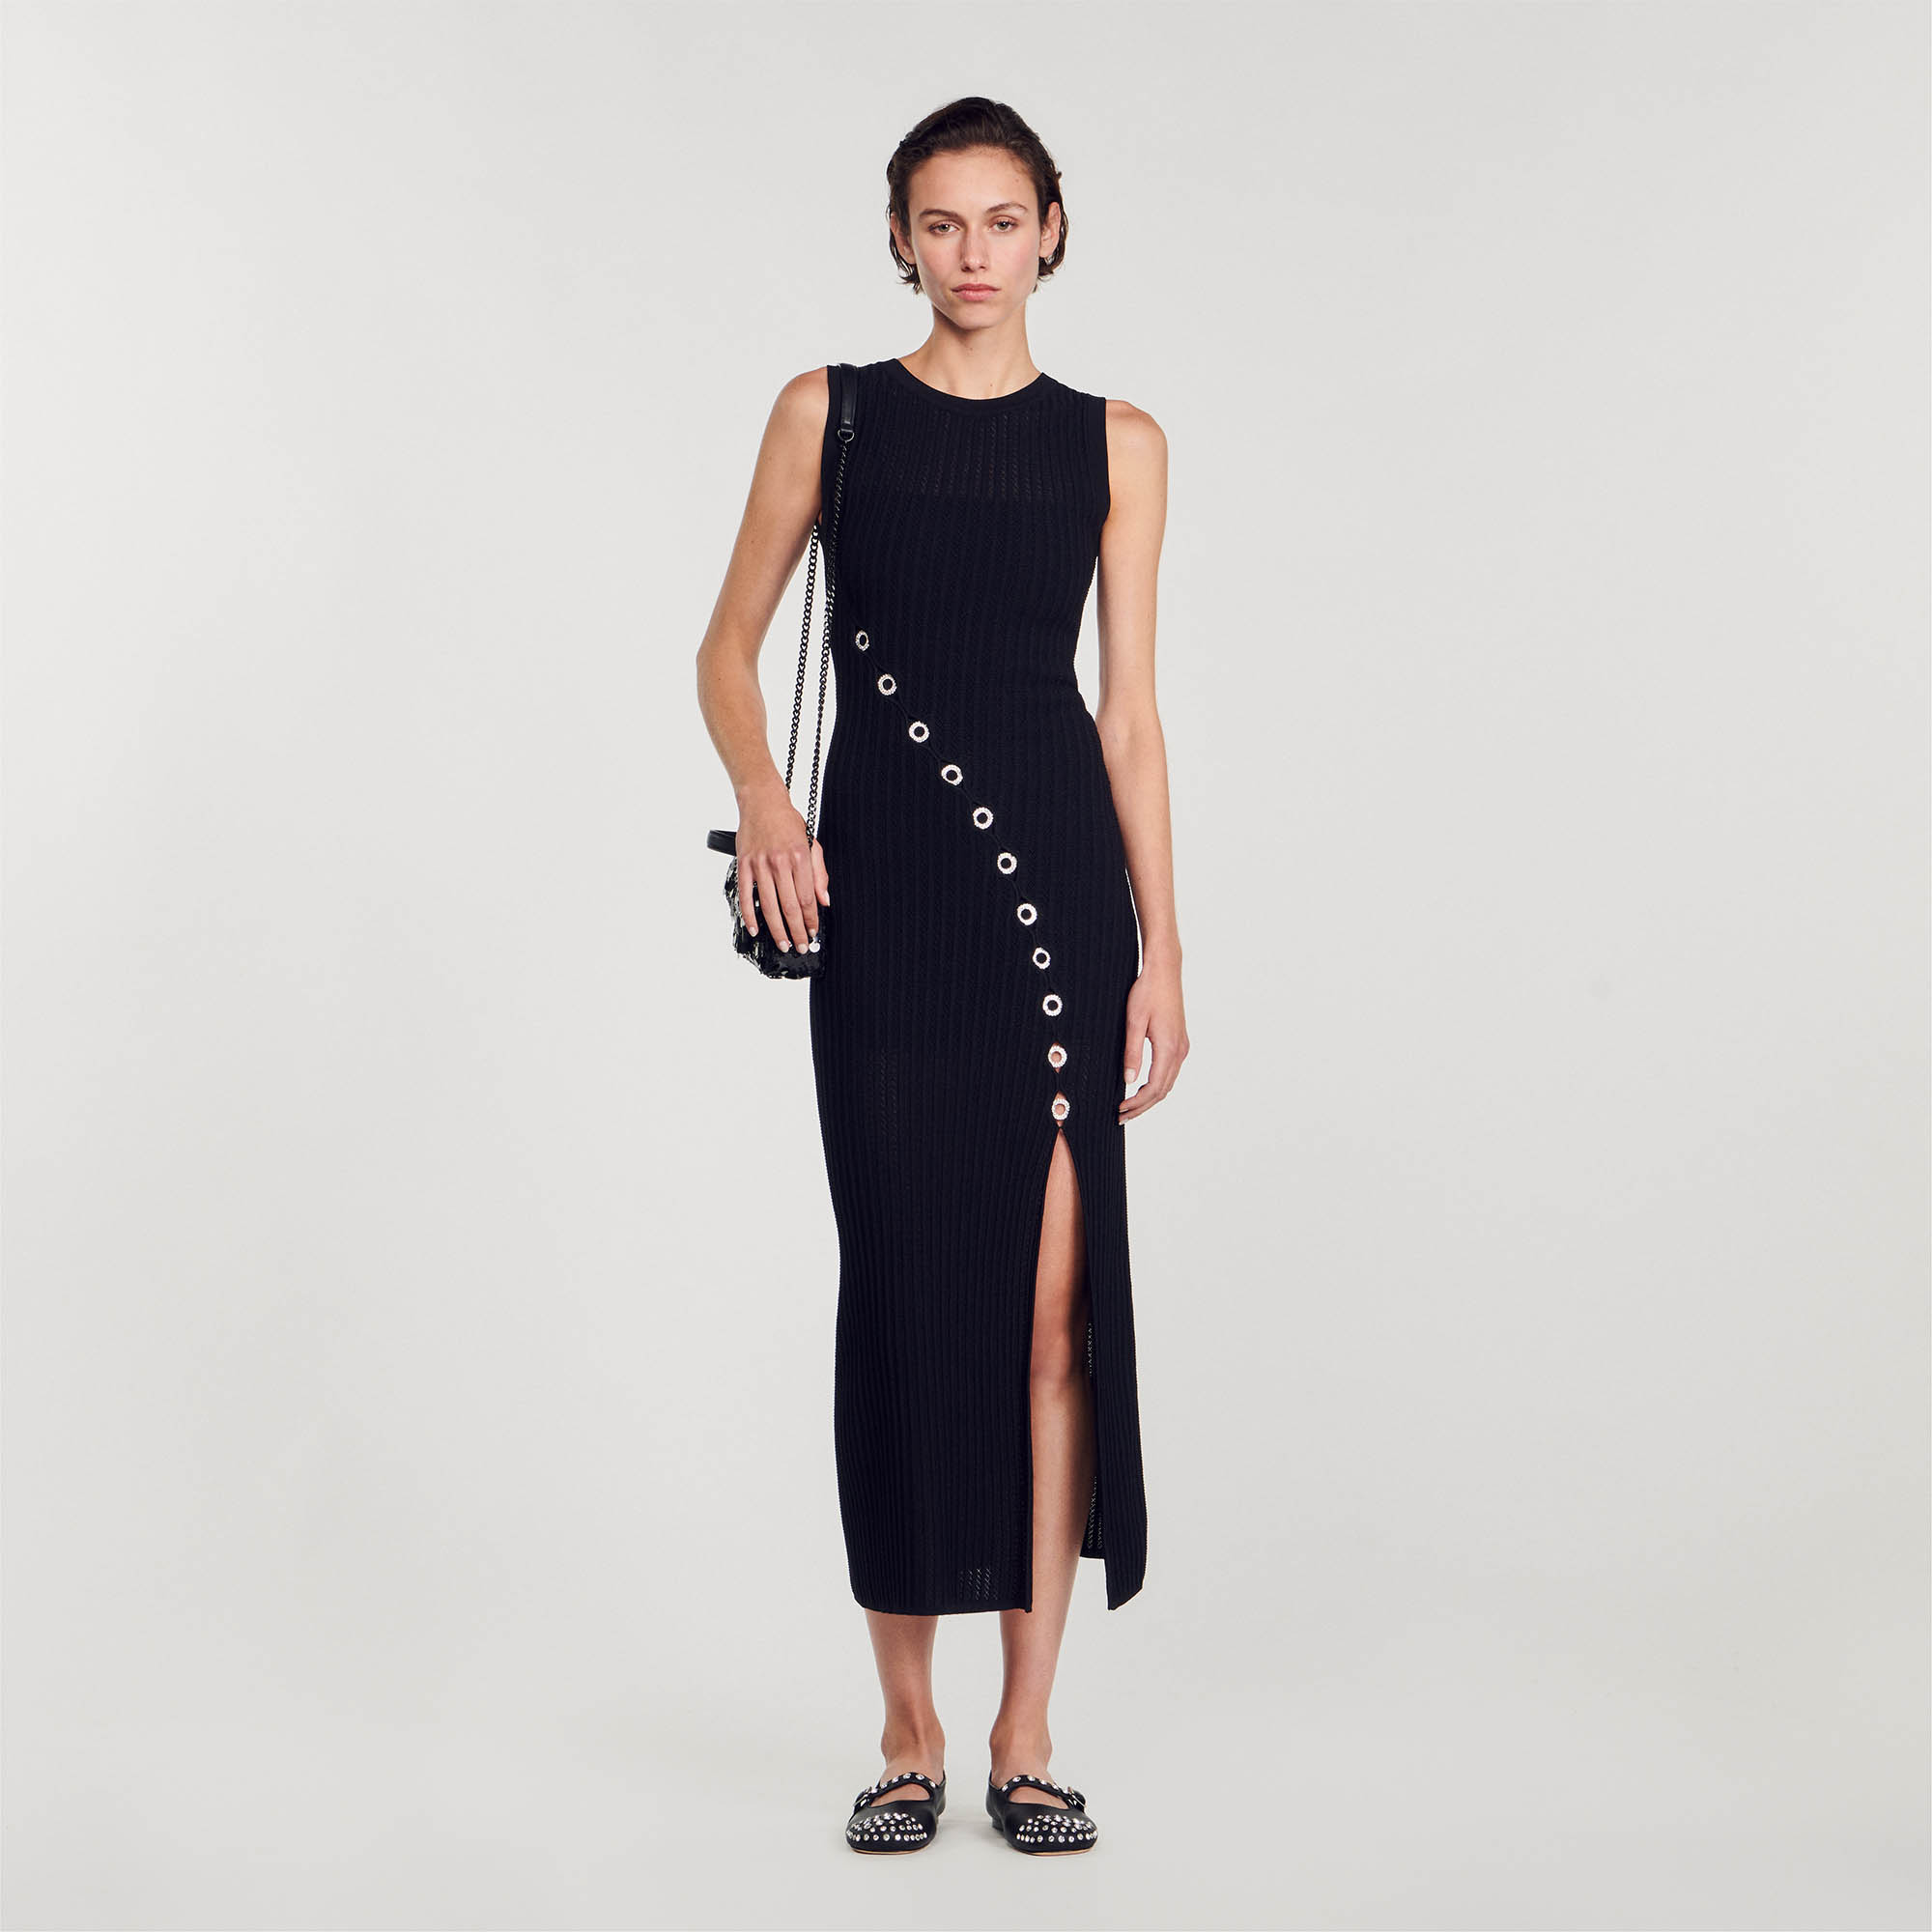 Sandro viscose Sleeveless rib knit maxi dress, with round neck, asymmetric front slit and embellished with openwork jewellery and rhinestone details